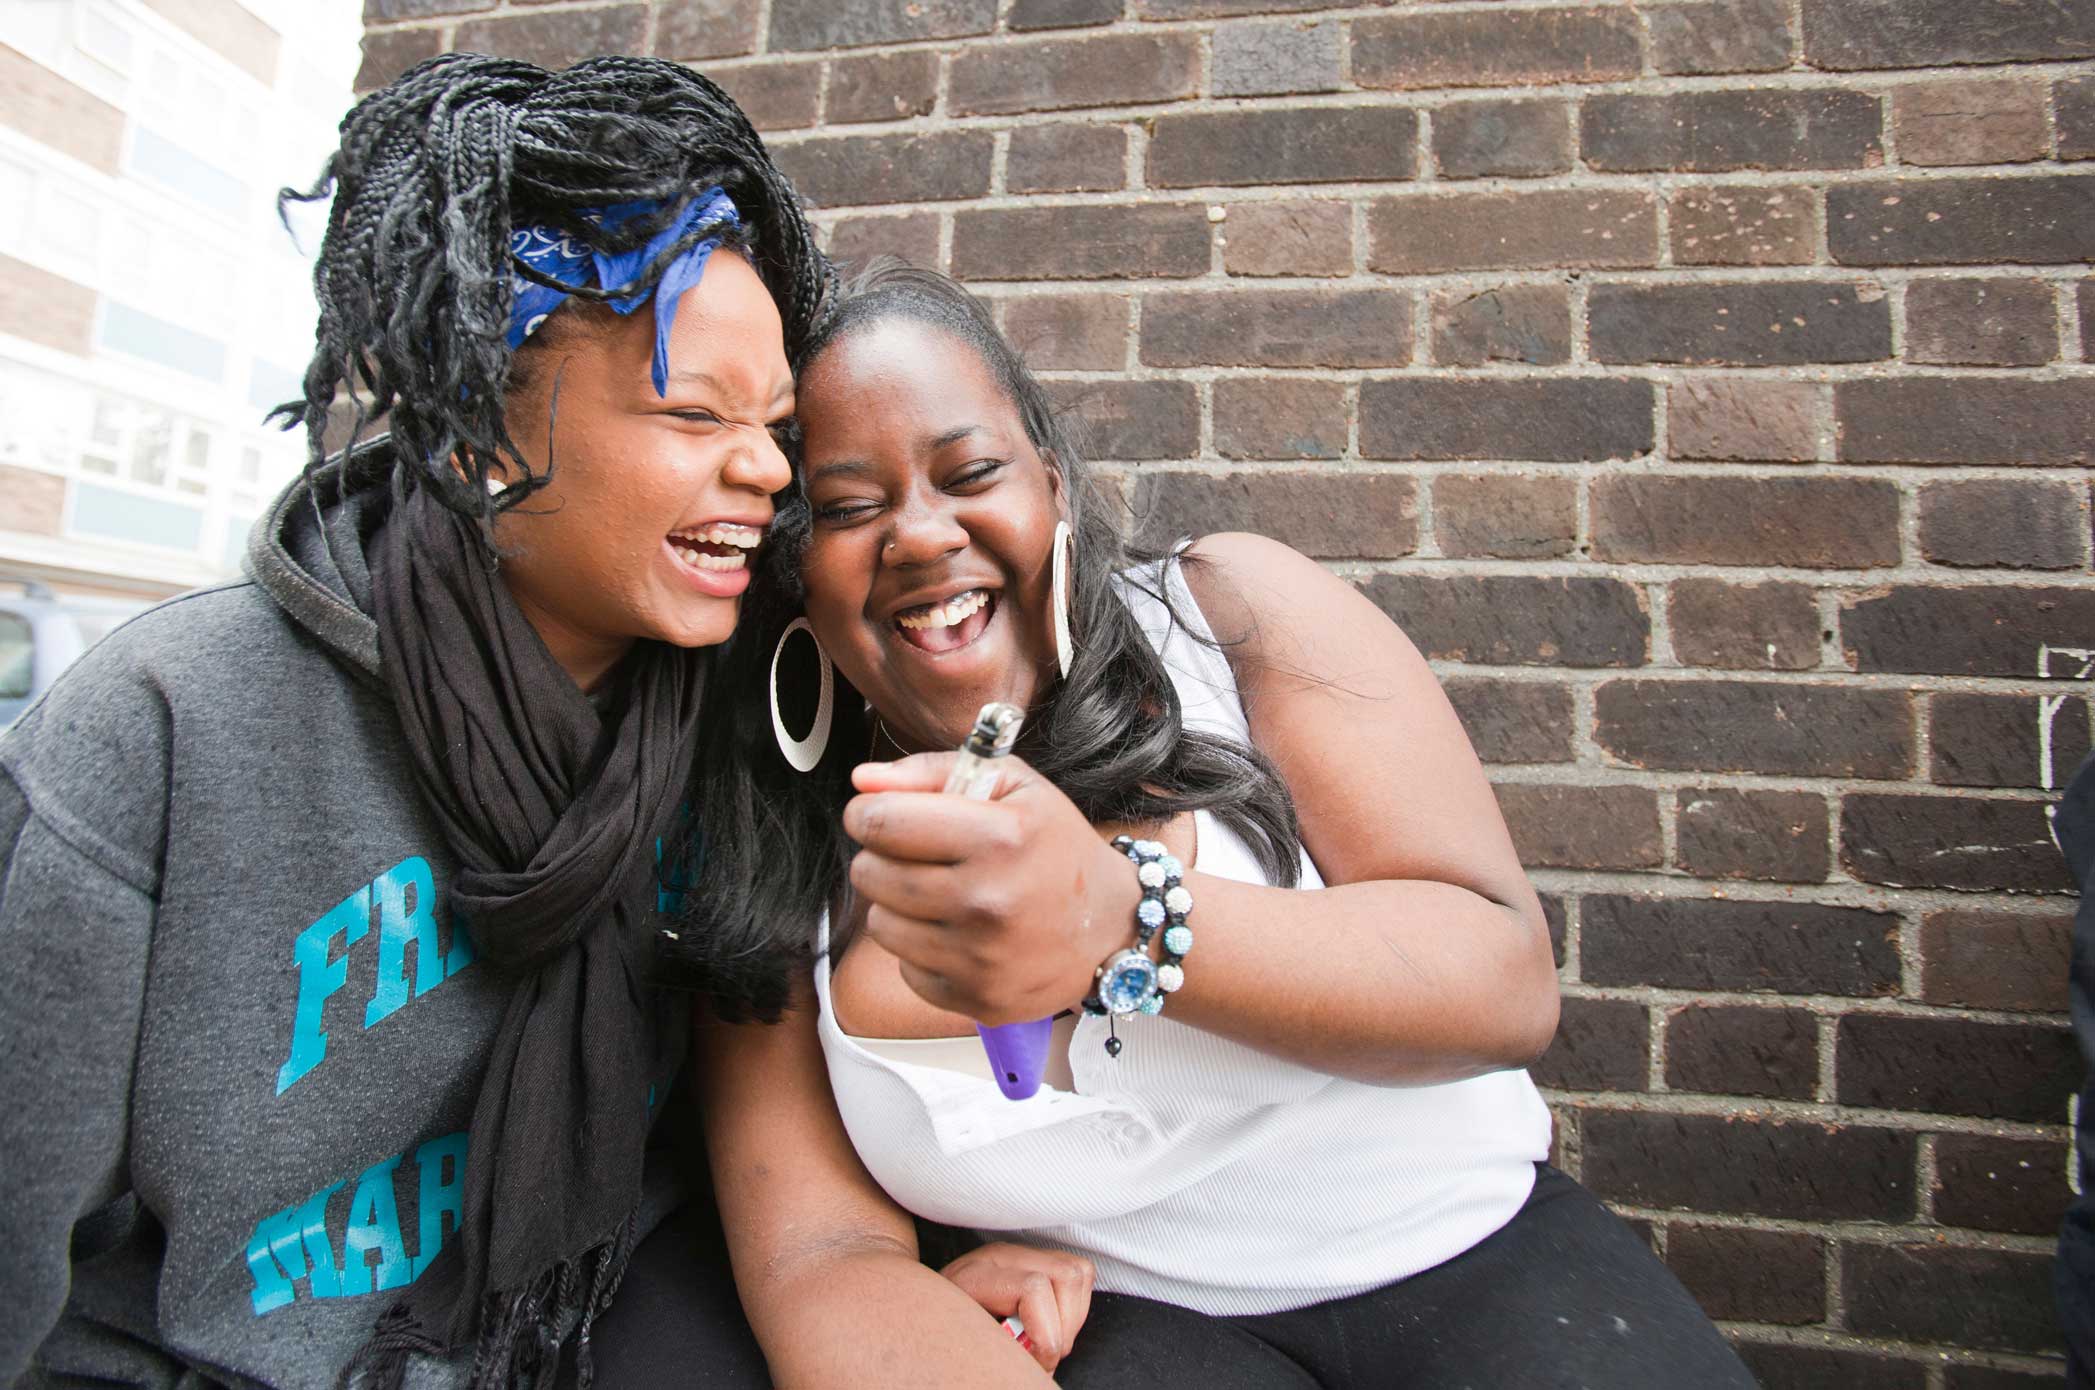 Two Black girls laughing together